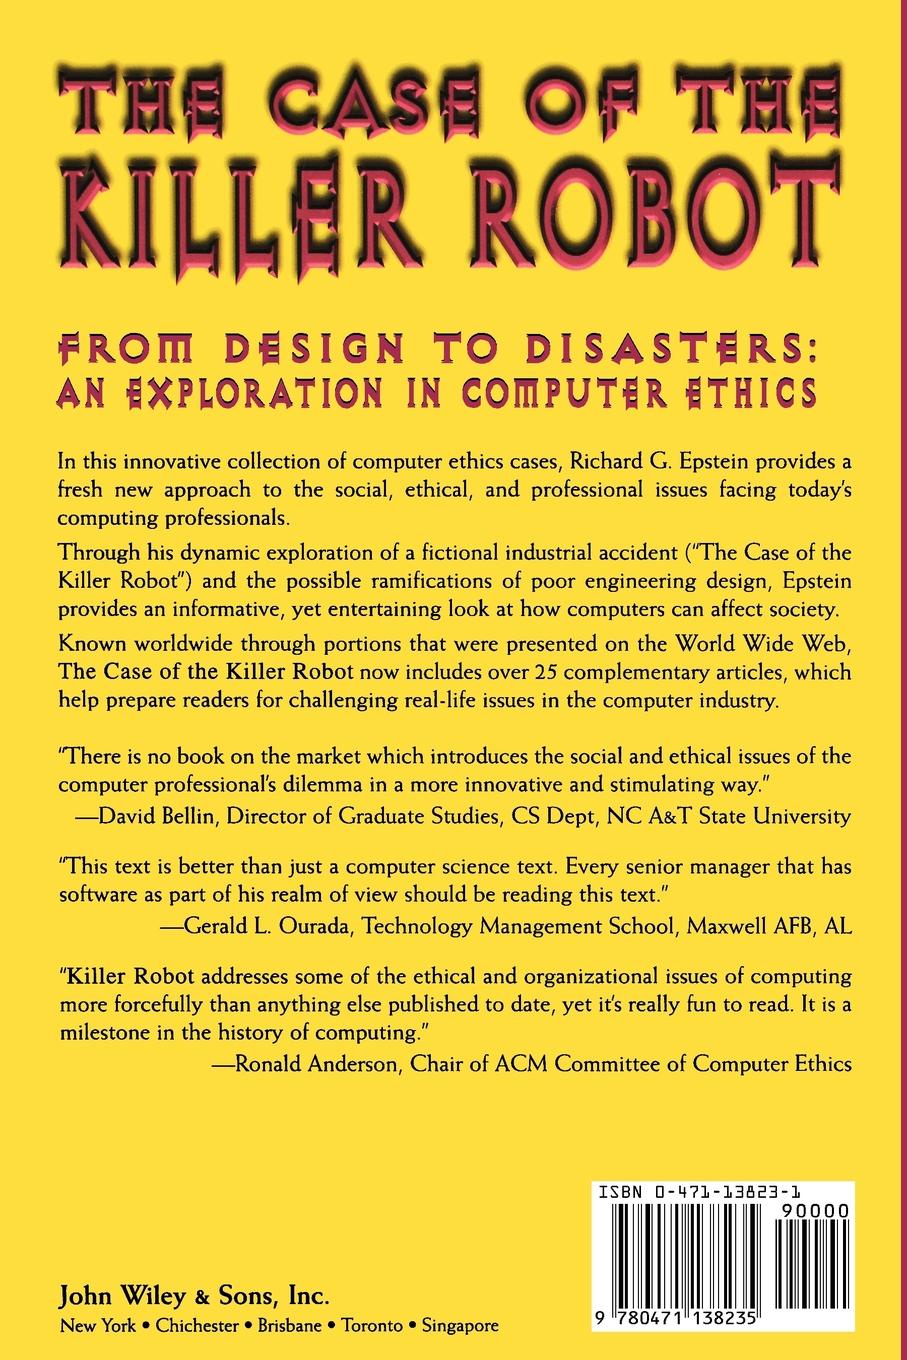 The Case of the Killer Robot. Stories about the Professional, Ethical, and Societal Dimensions of Computing